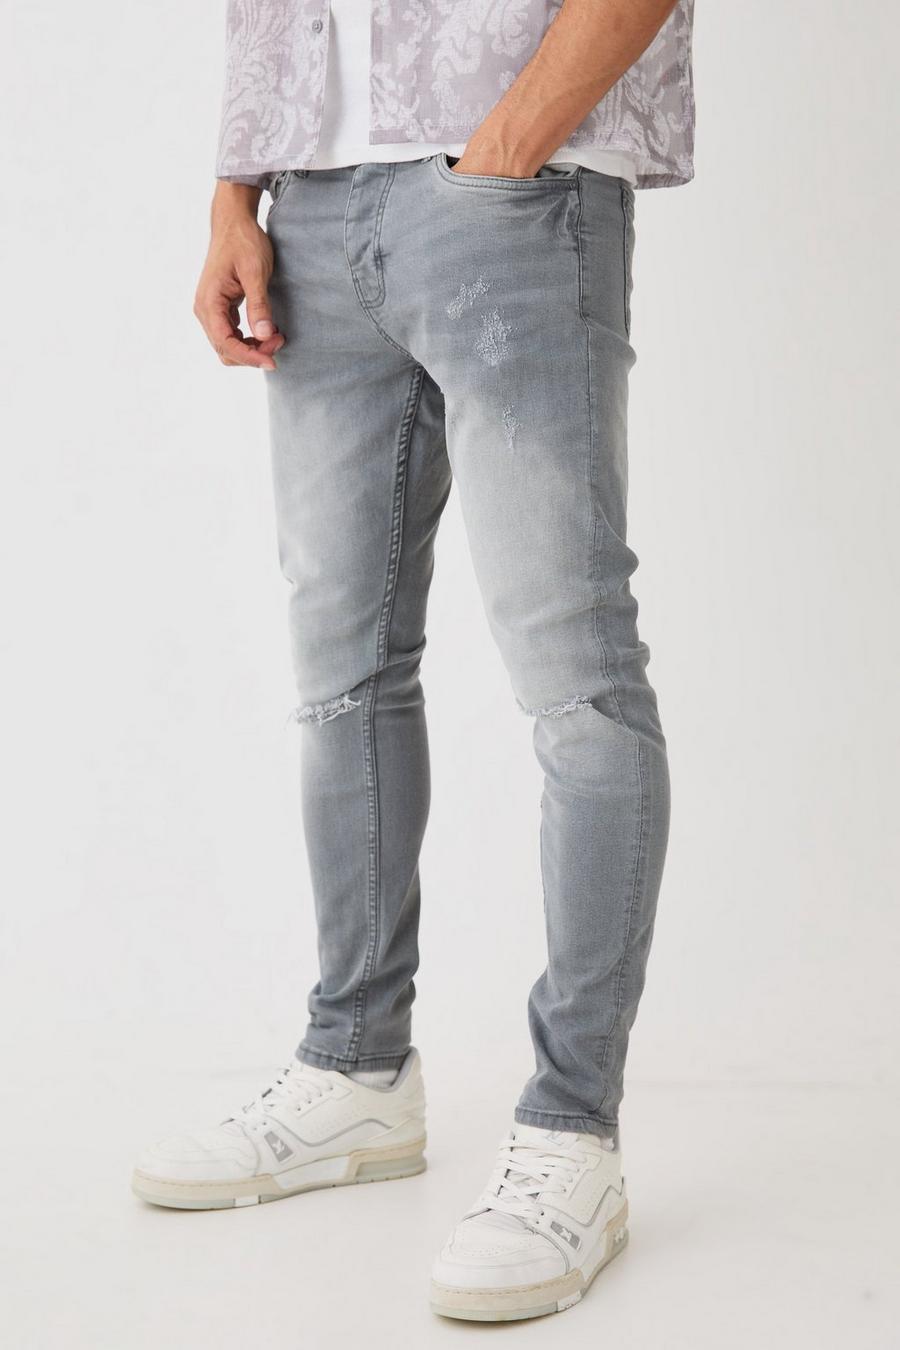 Ice grey Skinny Stretch Paint Splatter Ripped Jeans image number 1